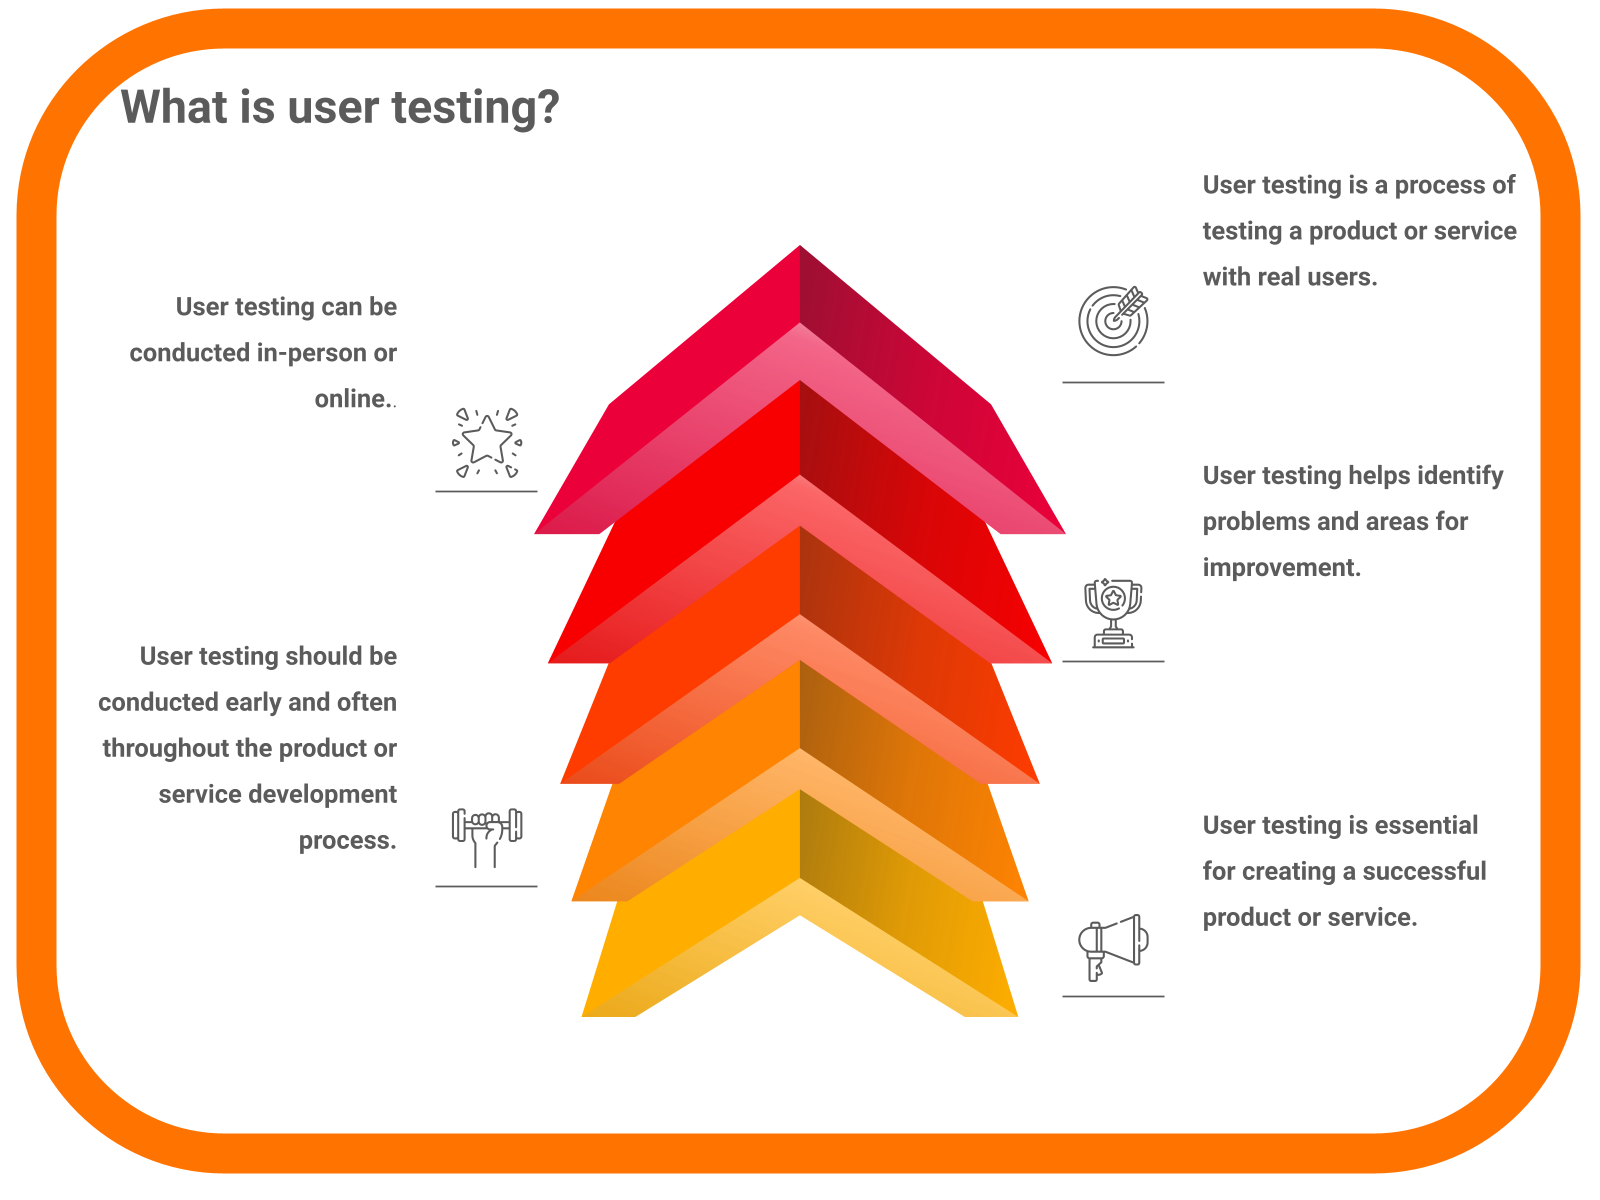 What is user testing?